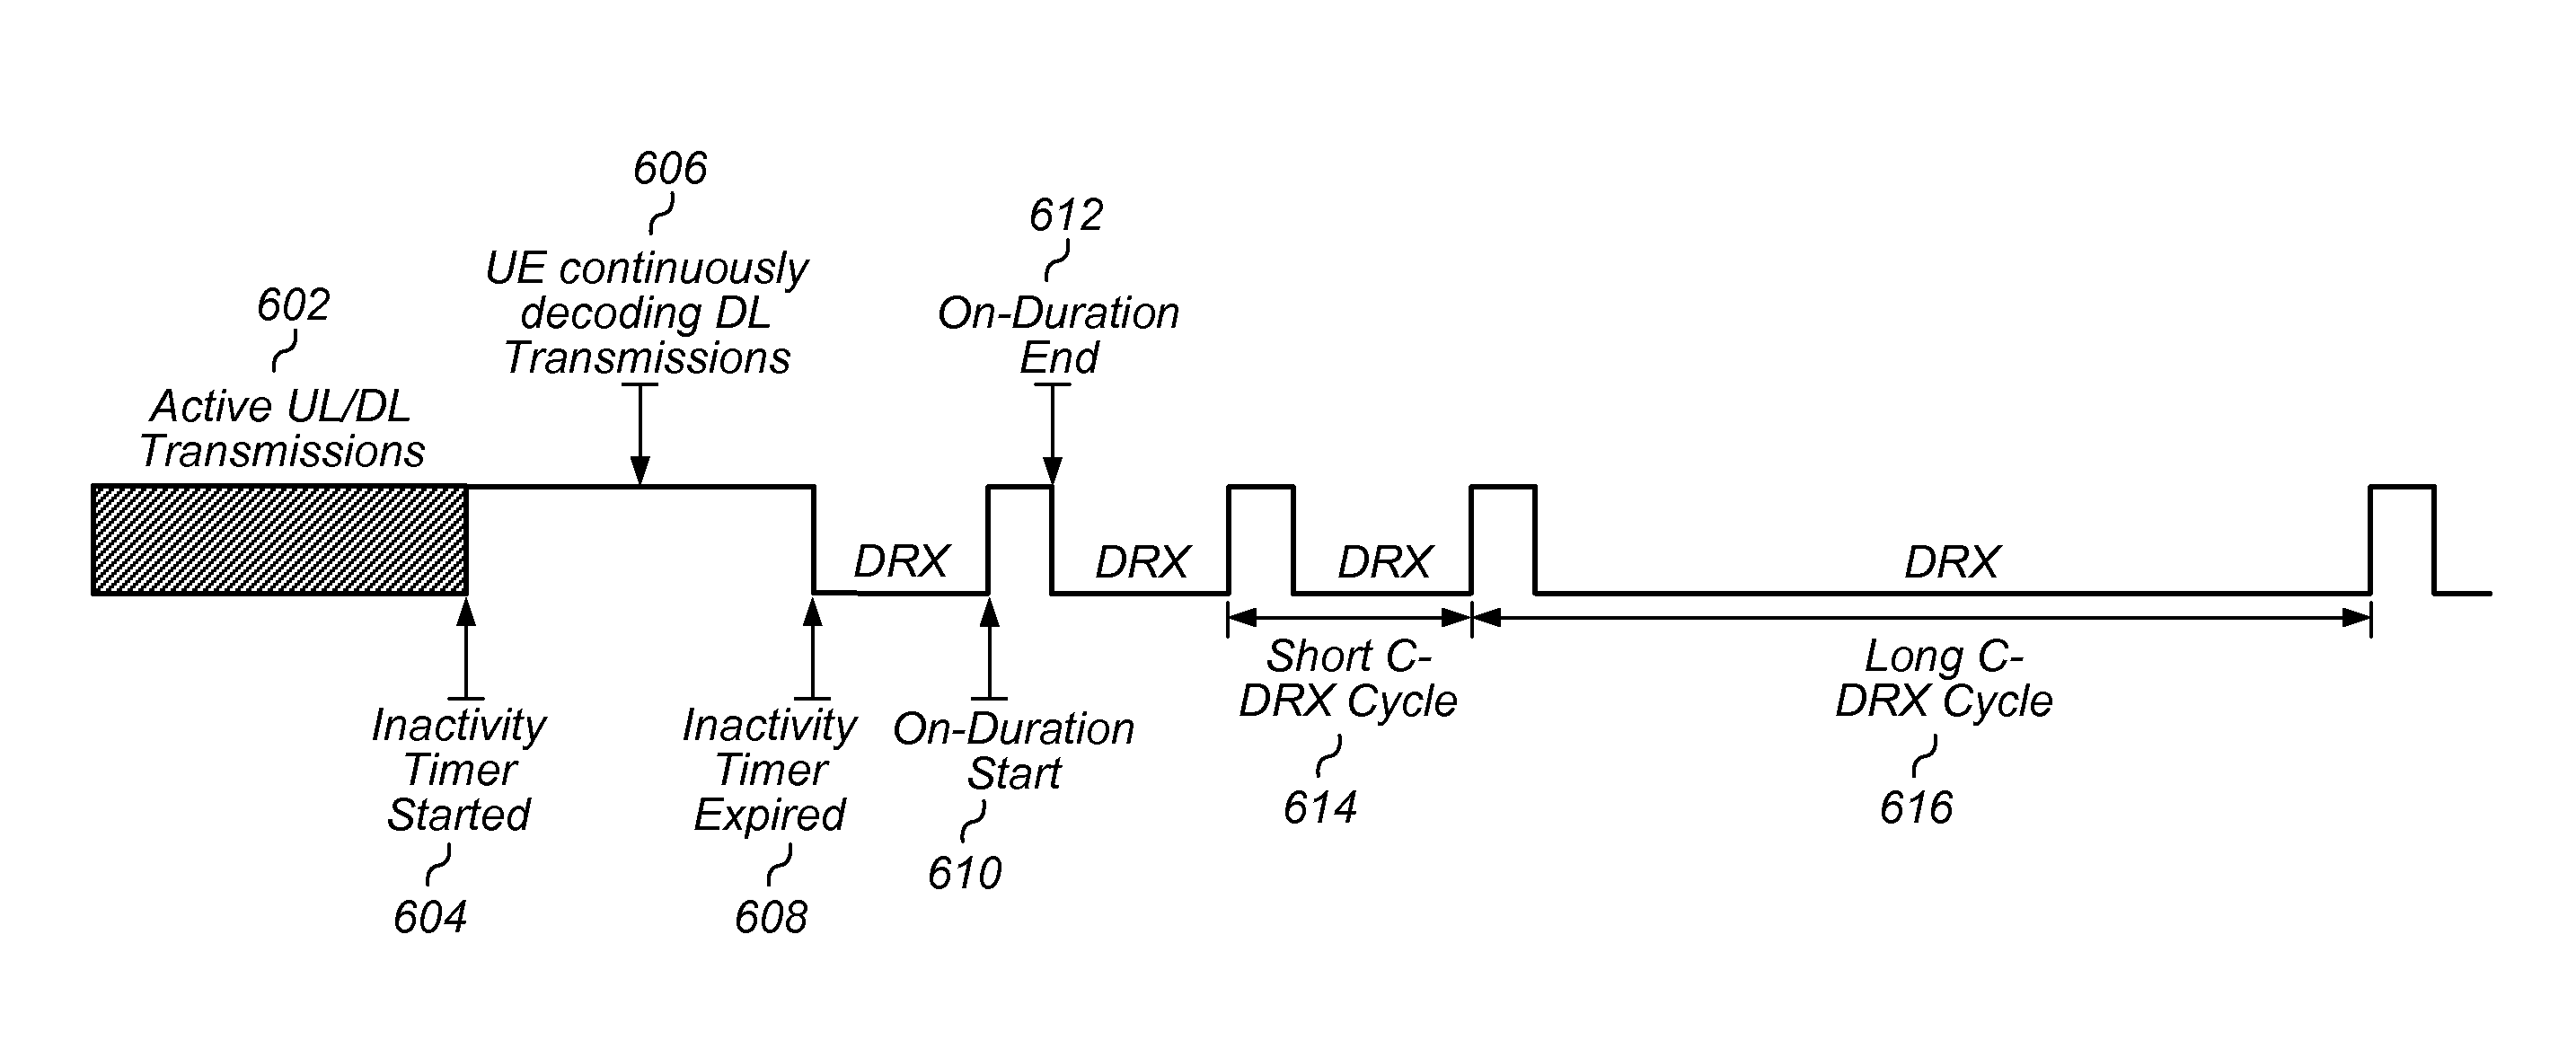 Reducing Power Consumption in Voice over LTE Terminals using Semi Persistent Scheduling in Connected Discontinuous Reception Mode